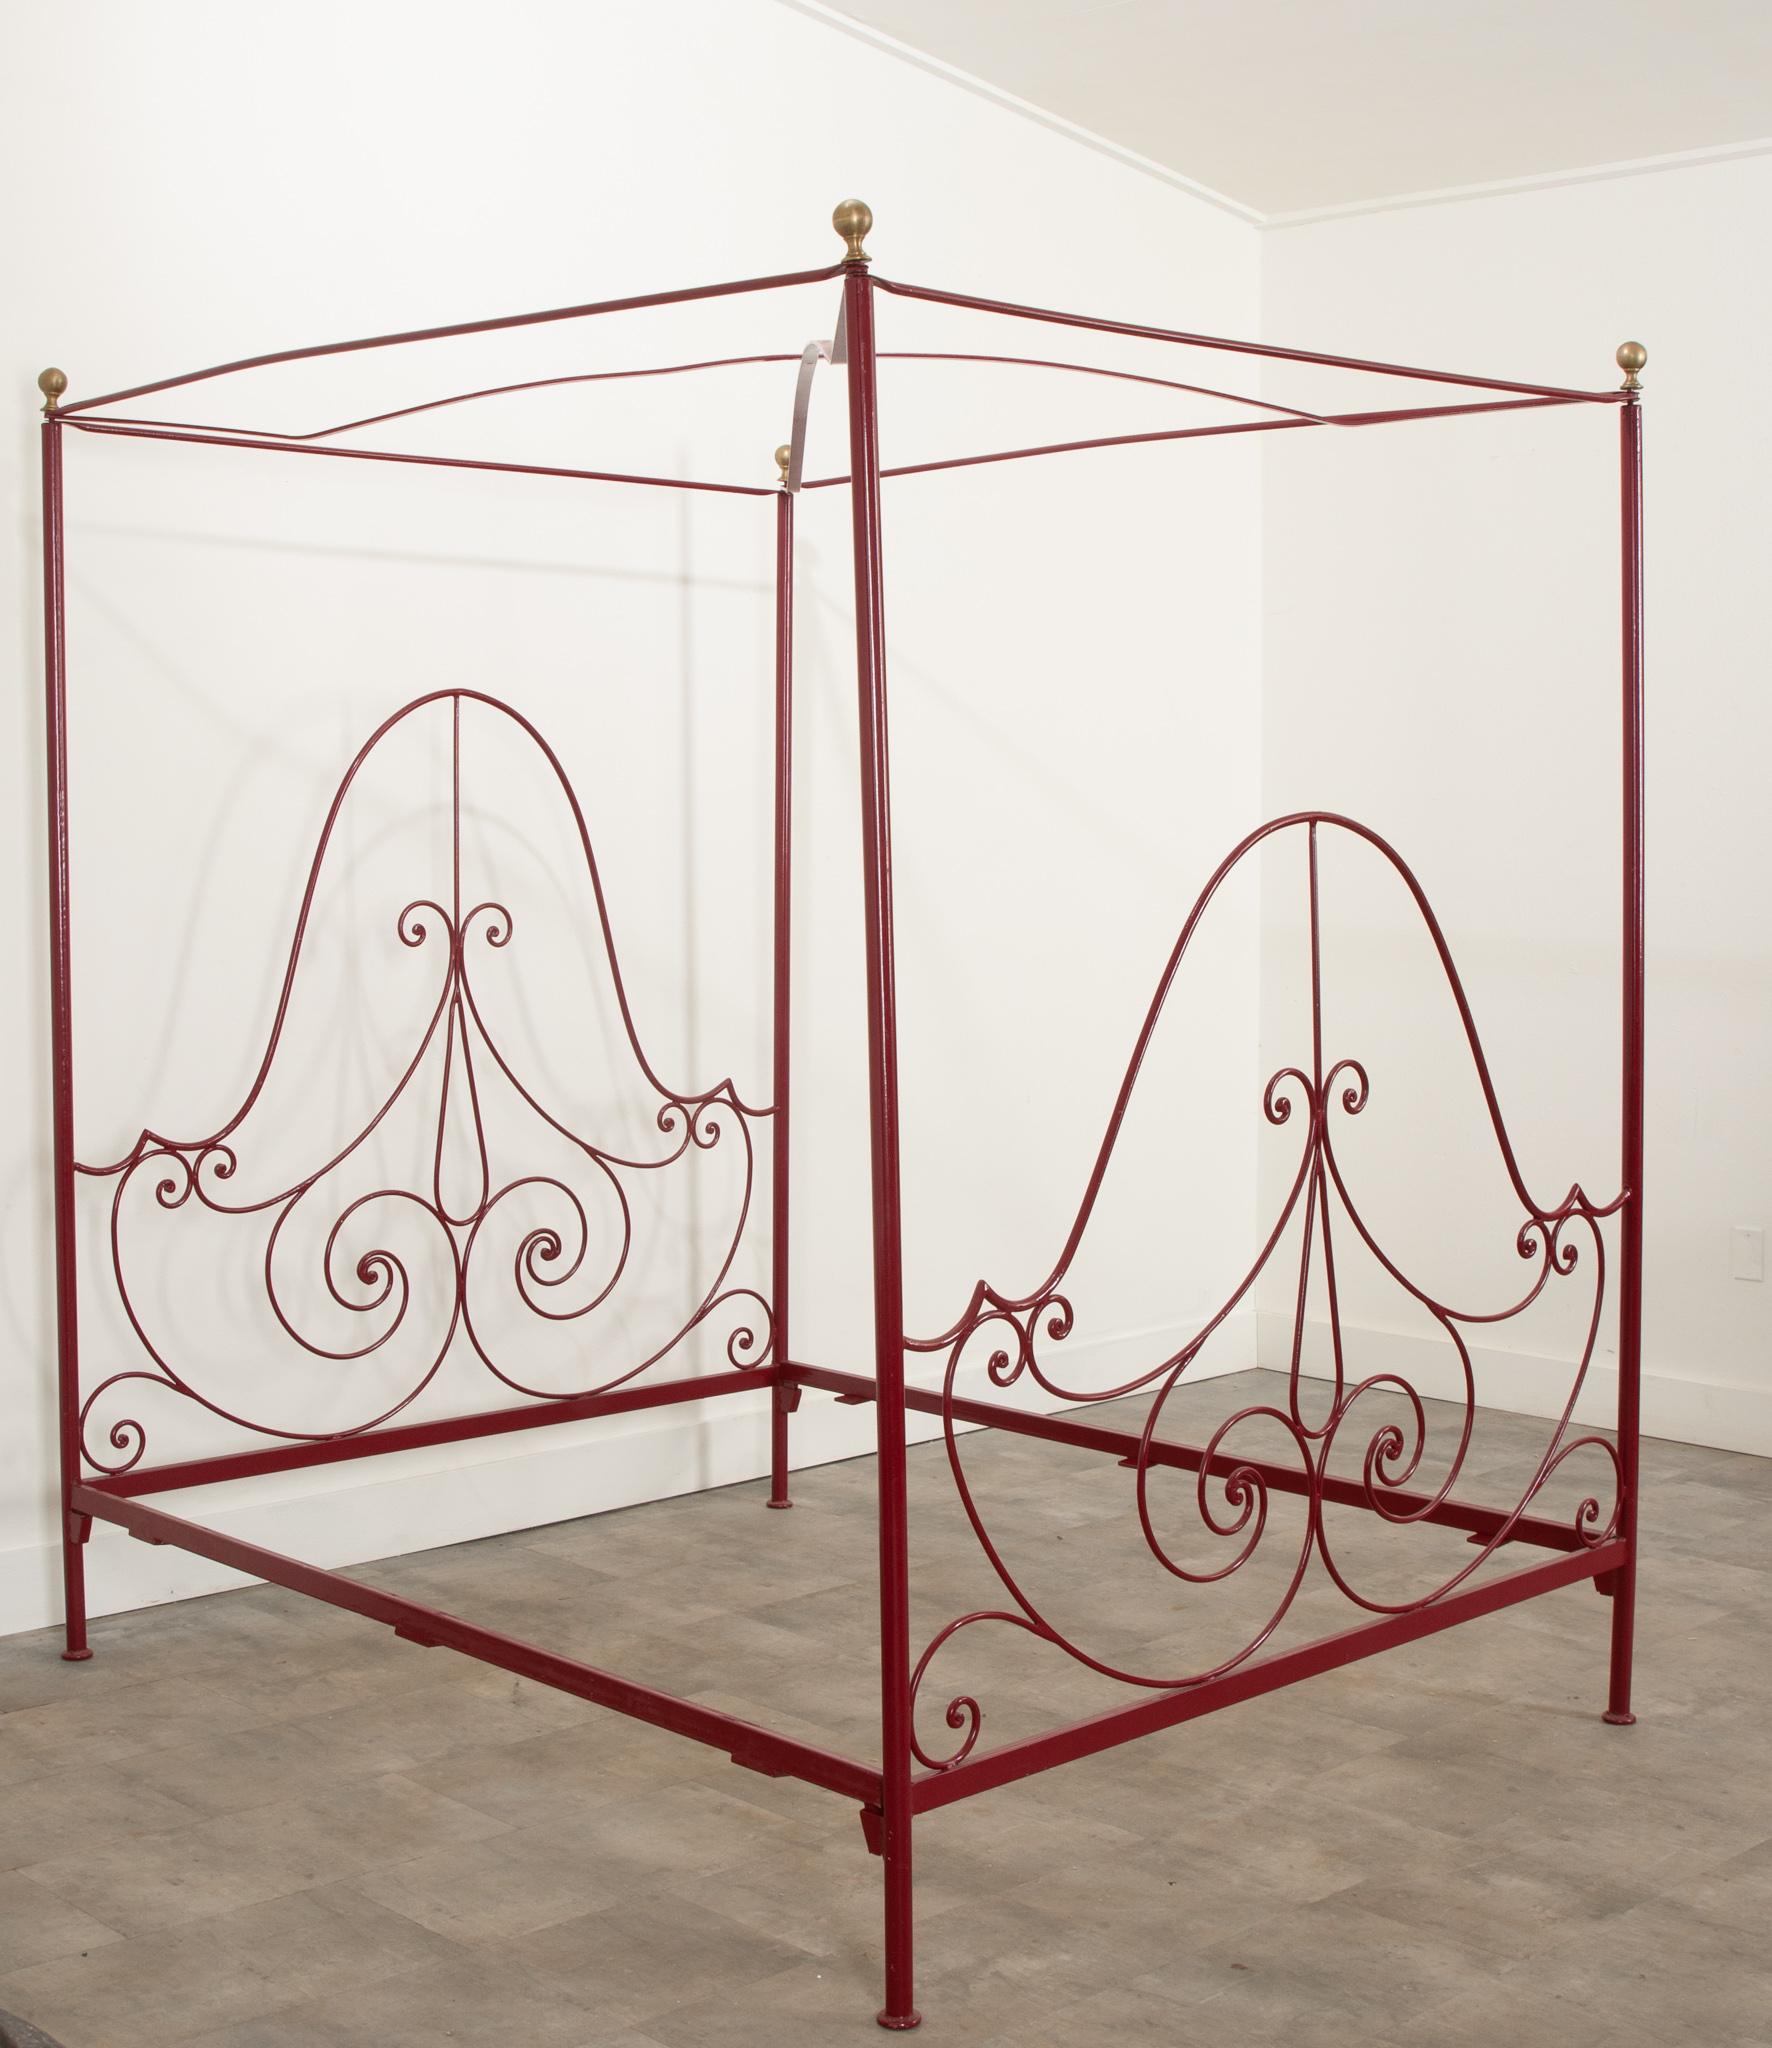 We just adore this canopy bed from 20th Century France. It's powder coated in a rich pomegranate shade and is in great vintage condition. Its canopy top is secured under brass spherical finials. Gorgeous S and C scrolls come together to compose the